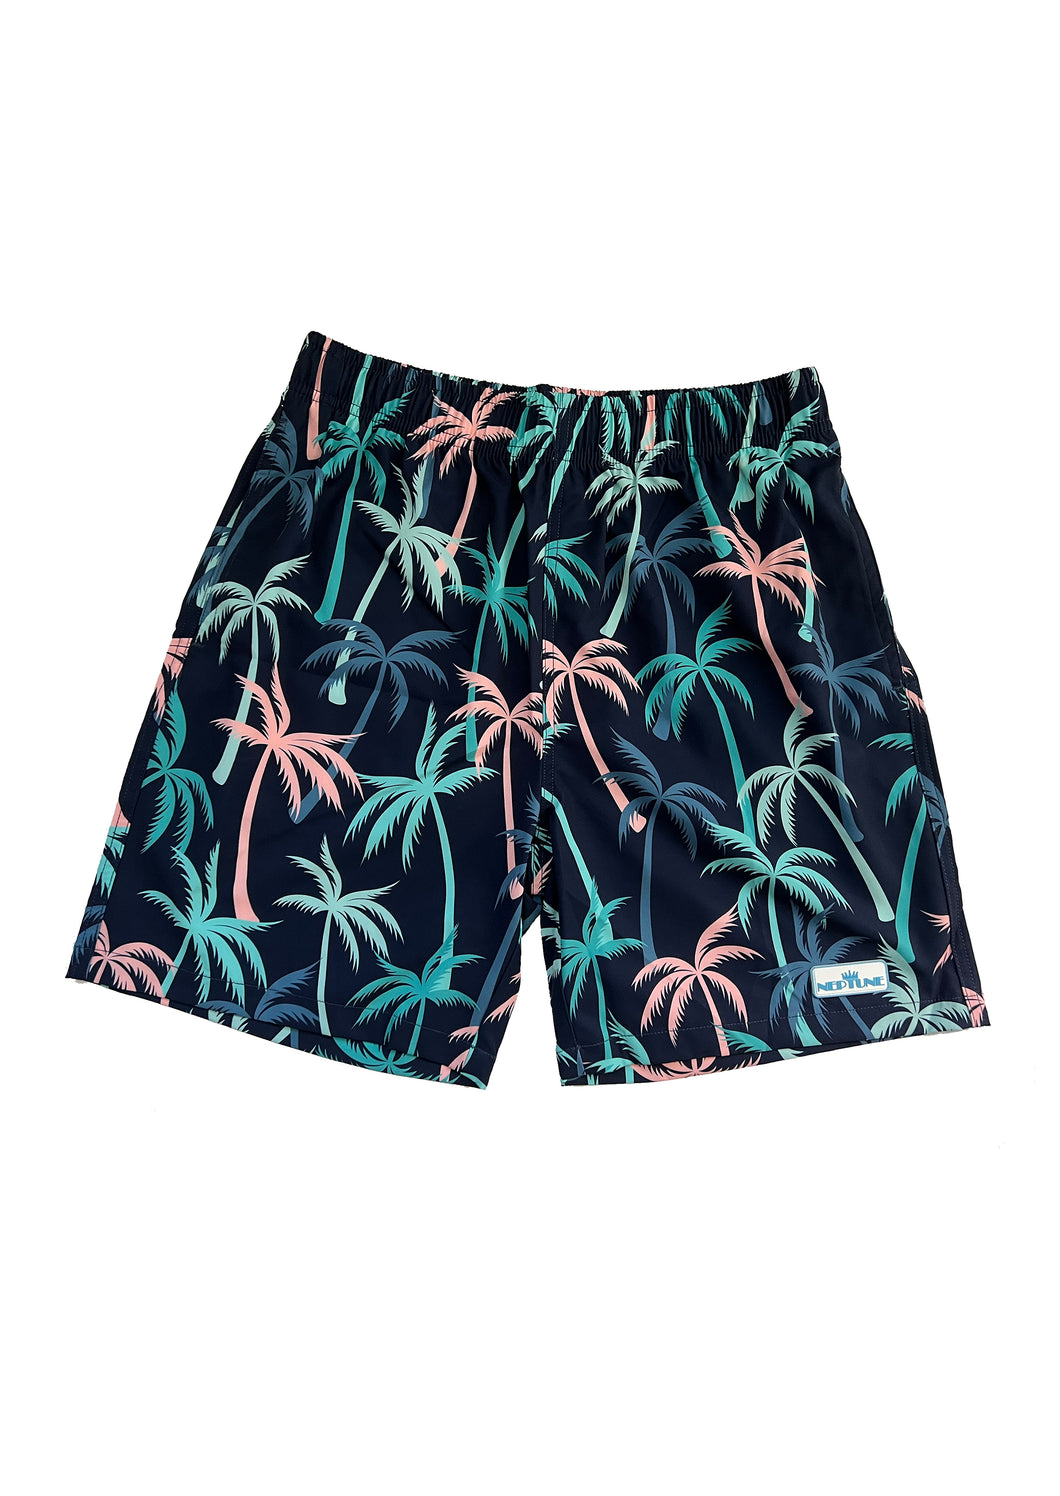 Adult Unisex Coconuts Board Shorts